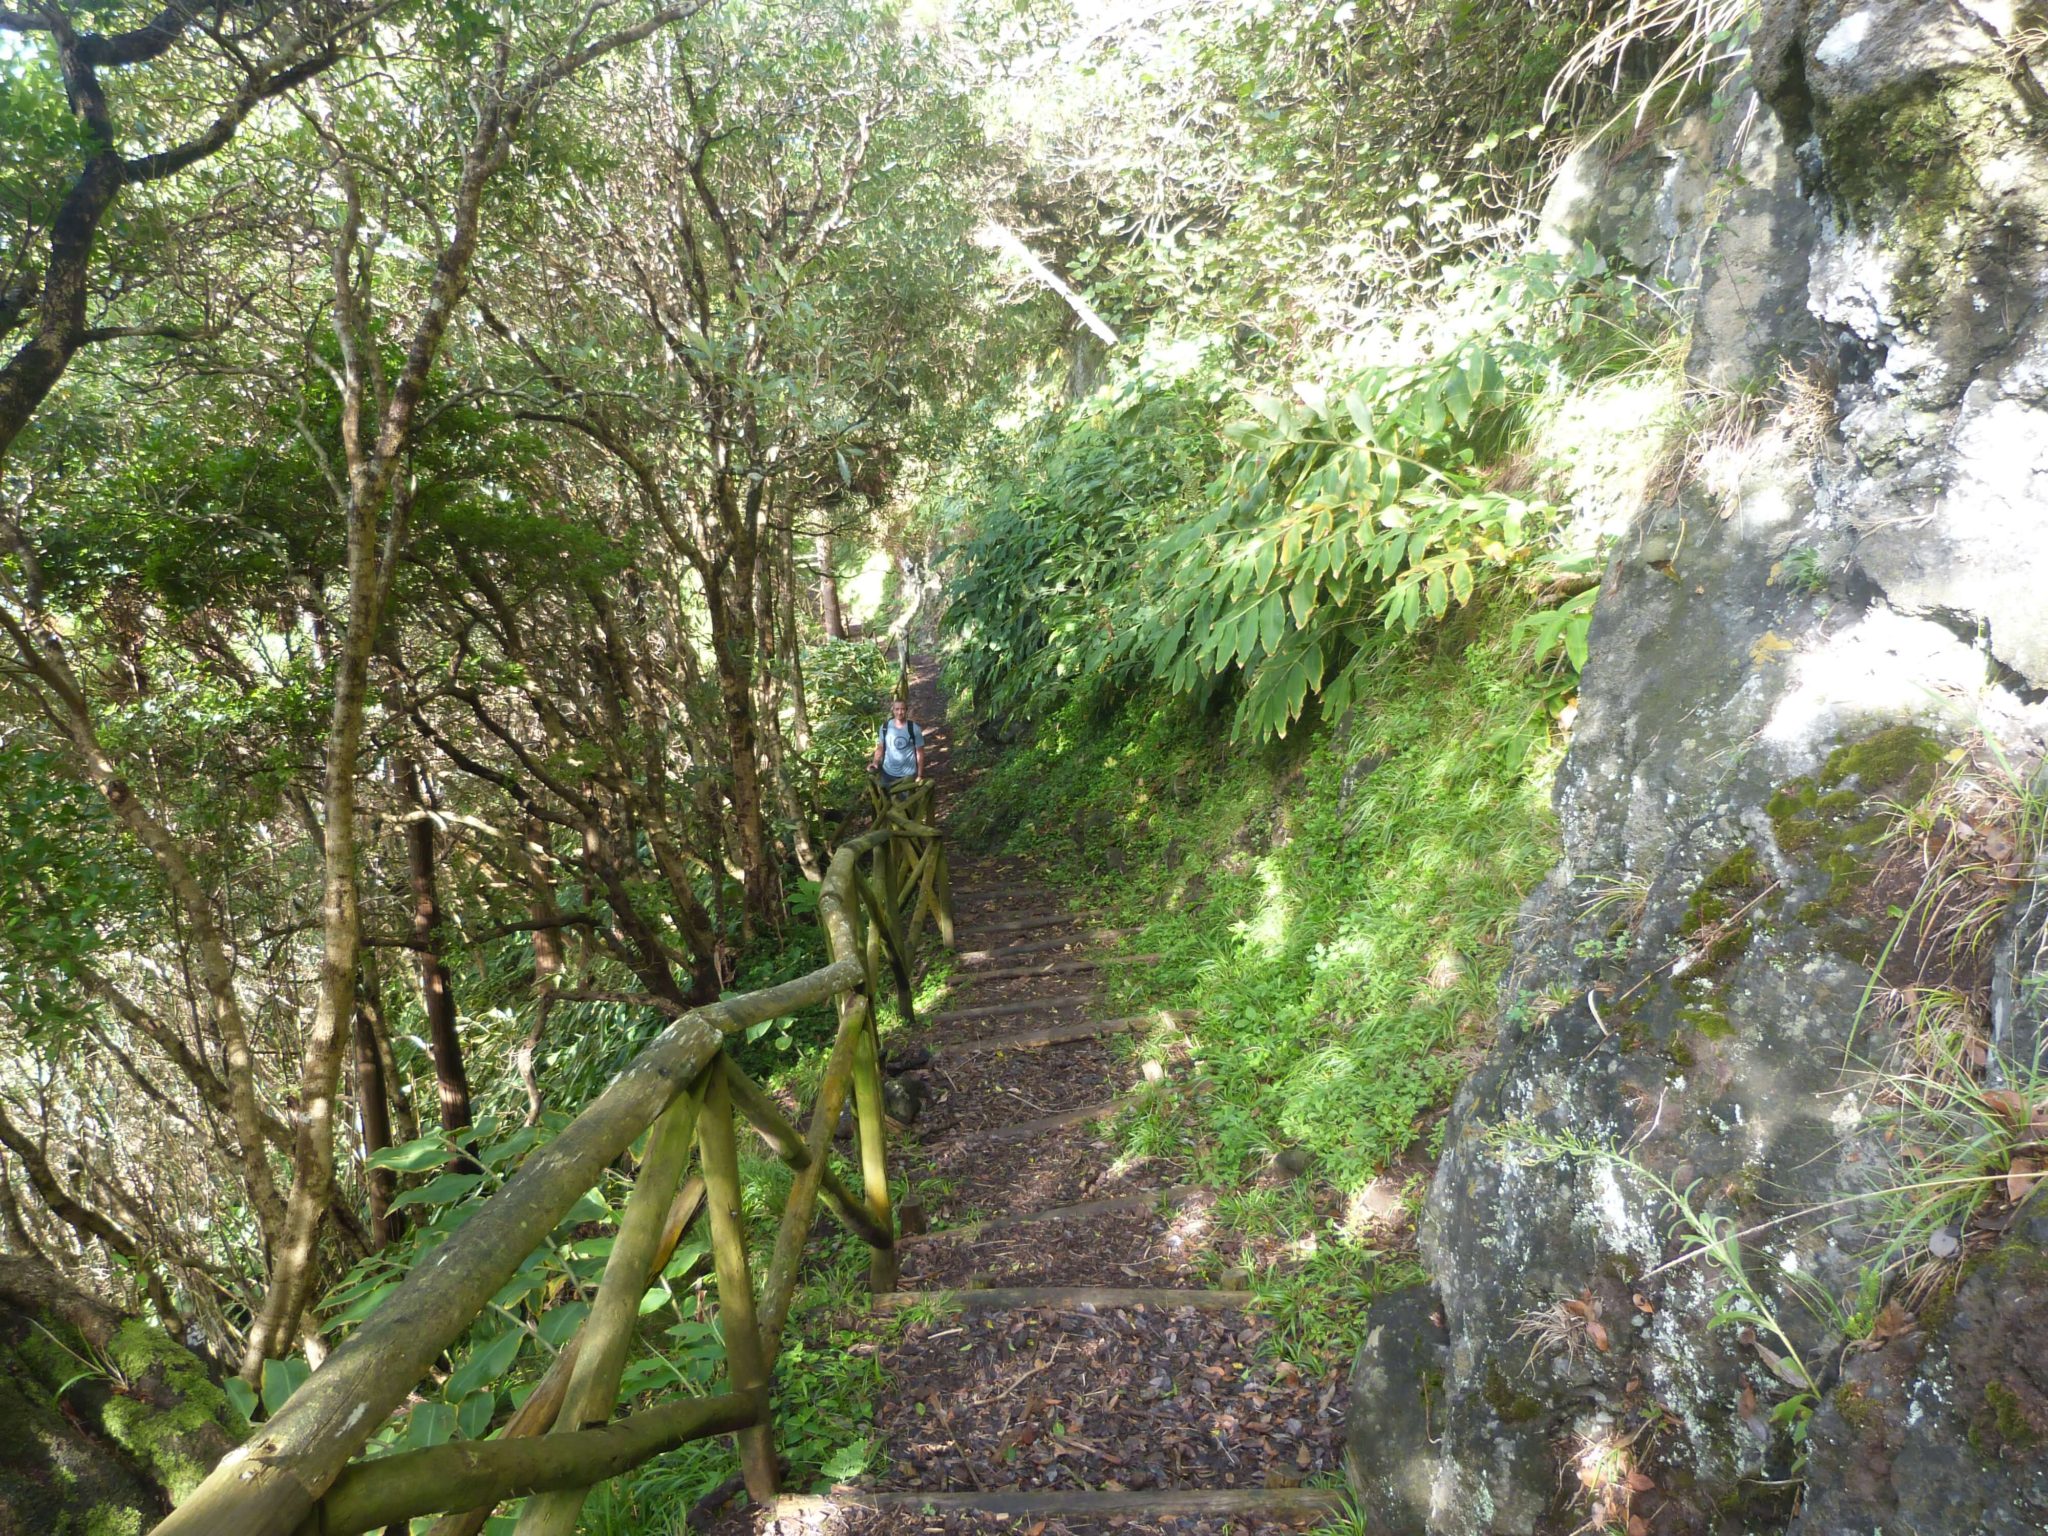 A Guide To Hiking In Flores, Azores - Wandering with a Dromomaniac